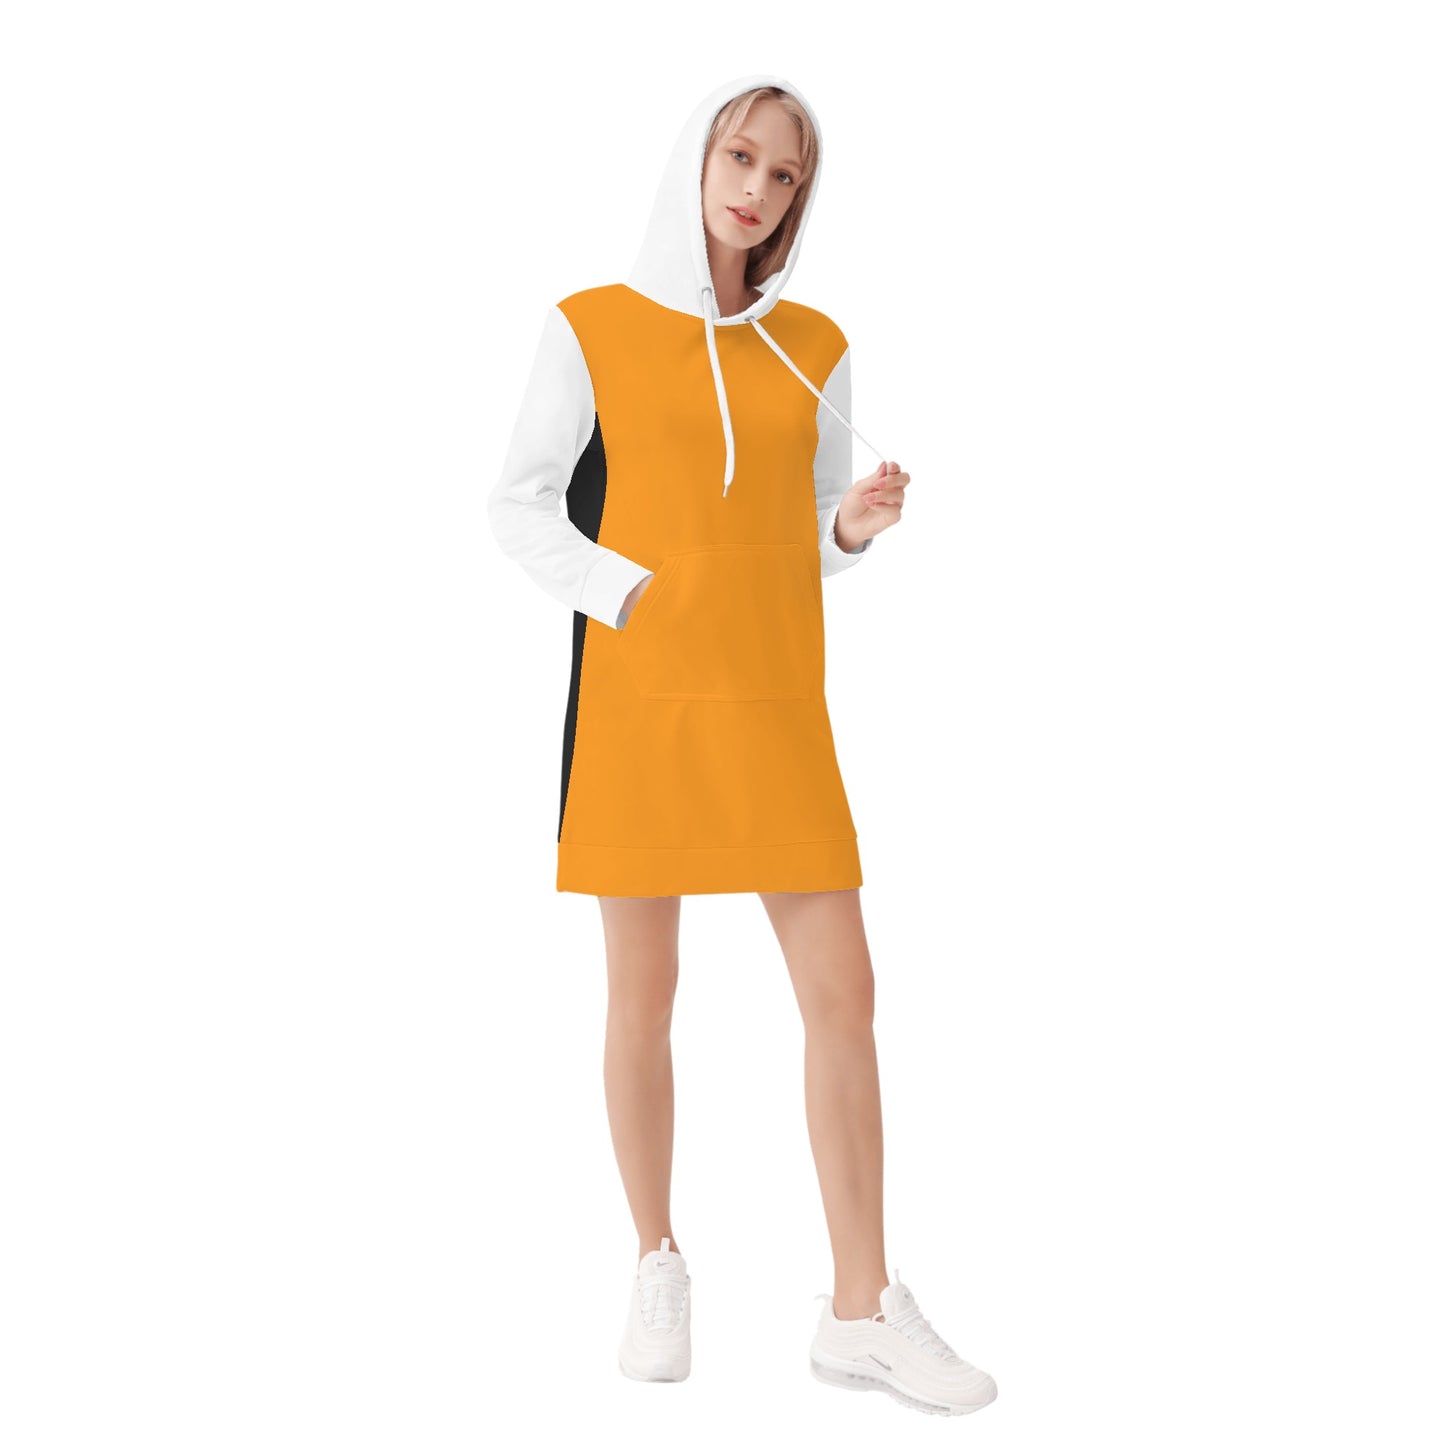 The B.E. Style Brand Hoodie Dress for Her